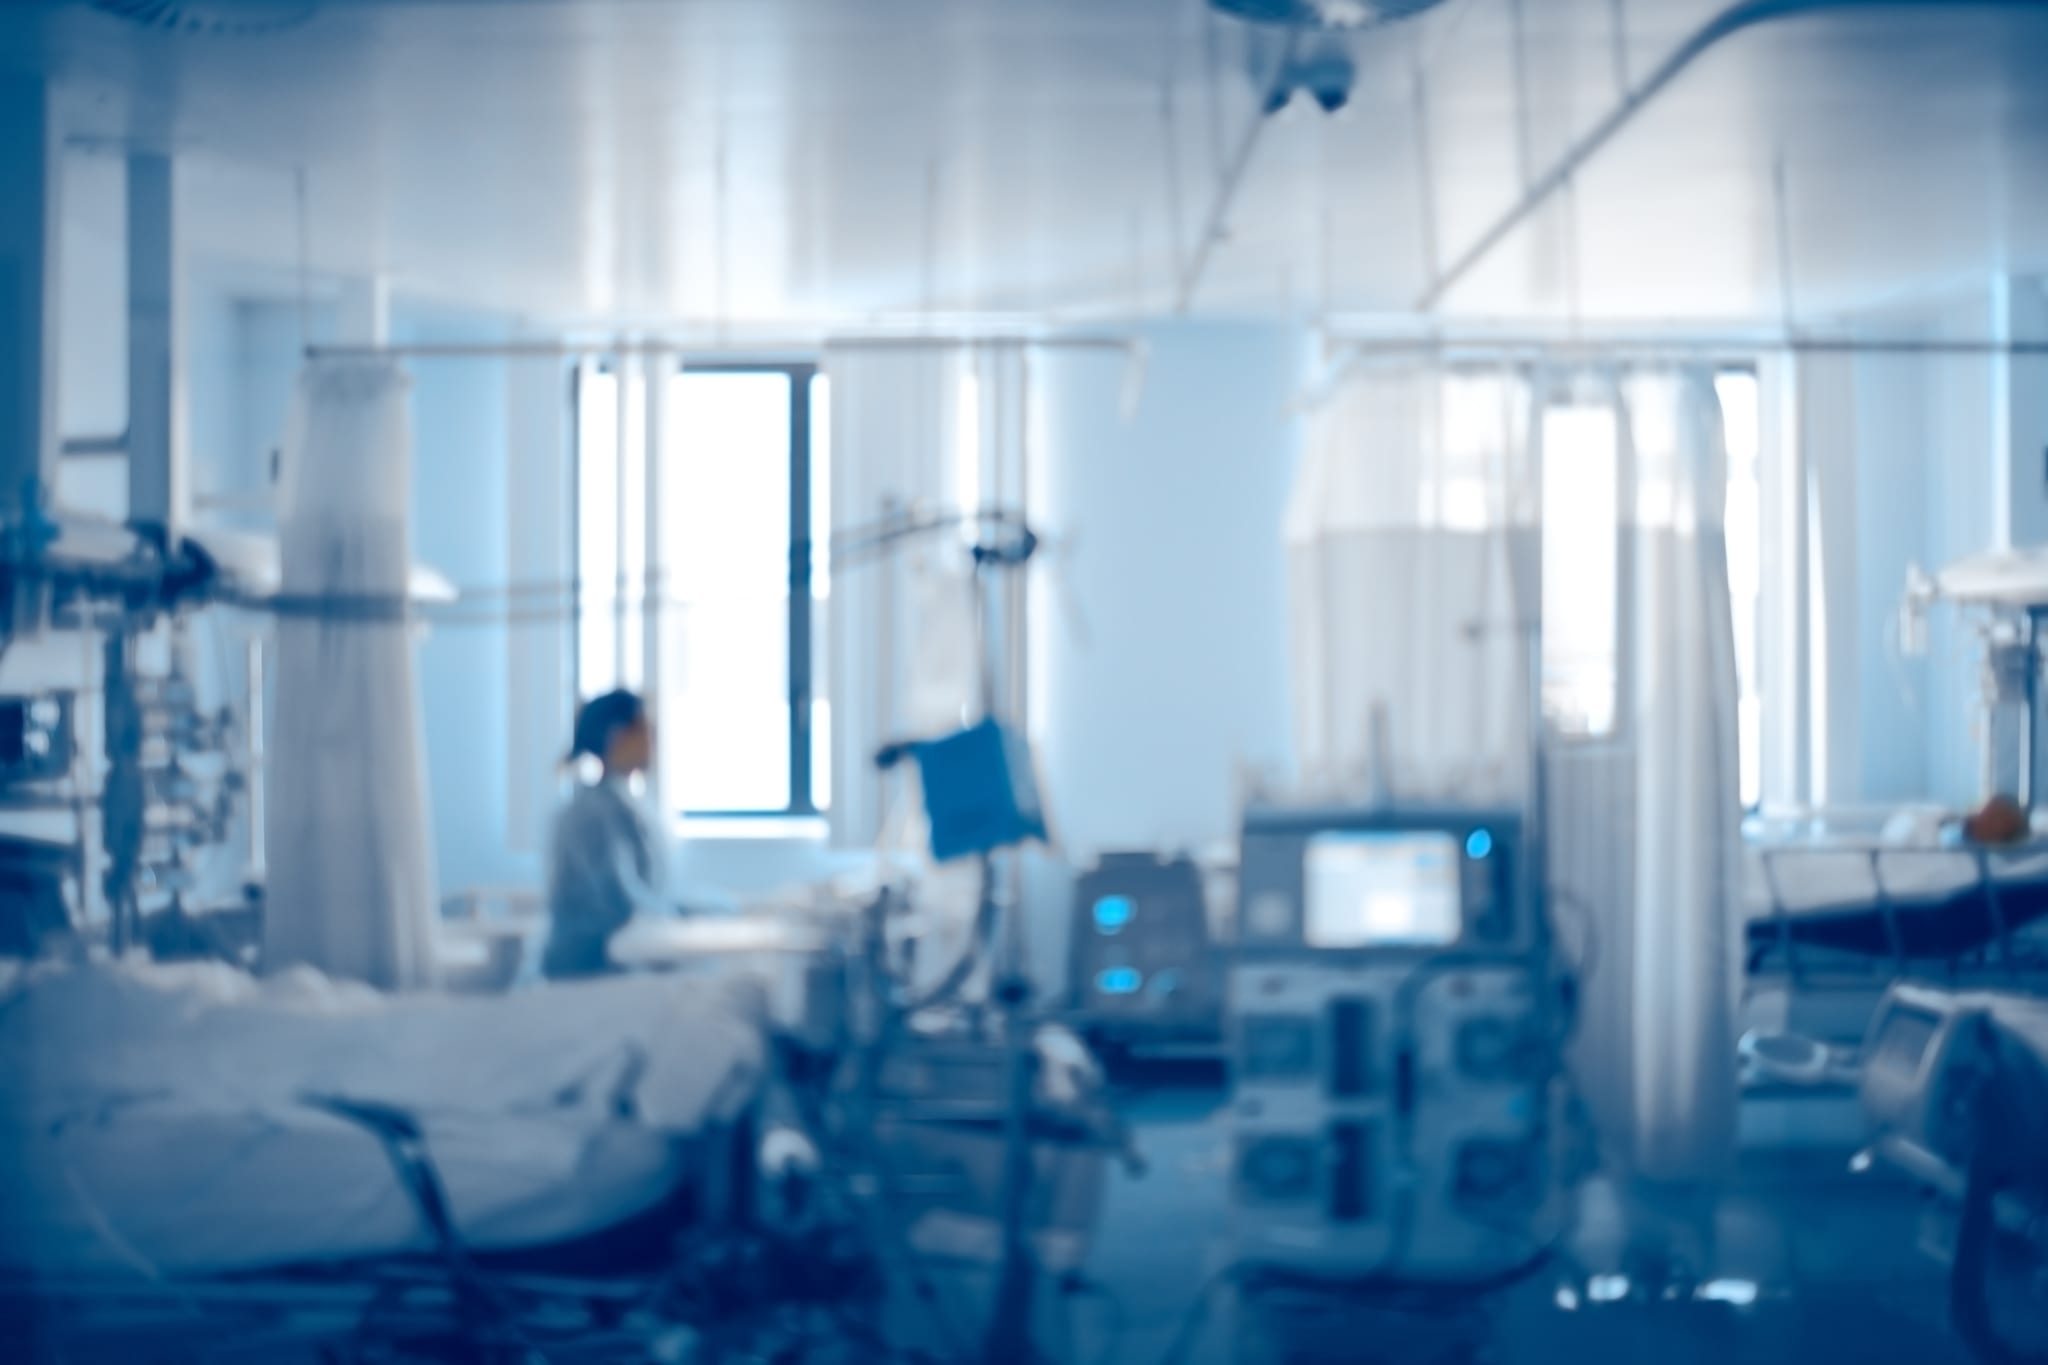 Equipped intensive care unit of modern hospital, unfocused background stock photo